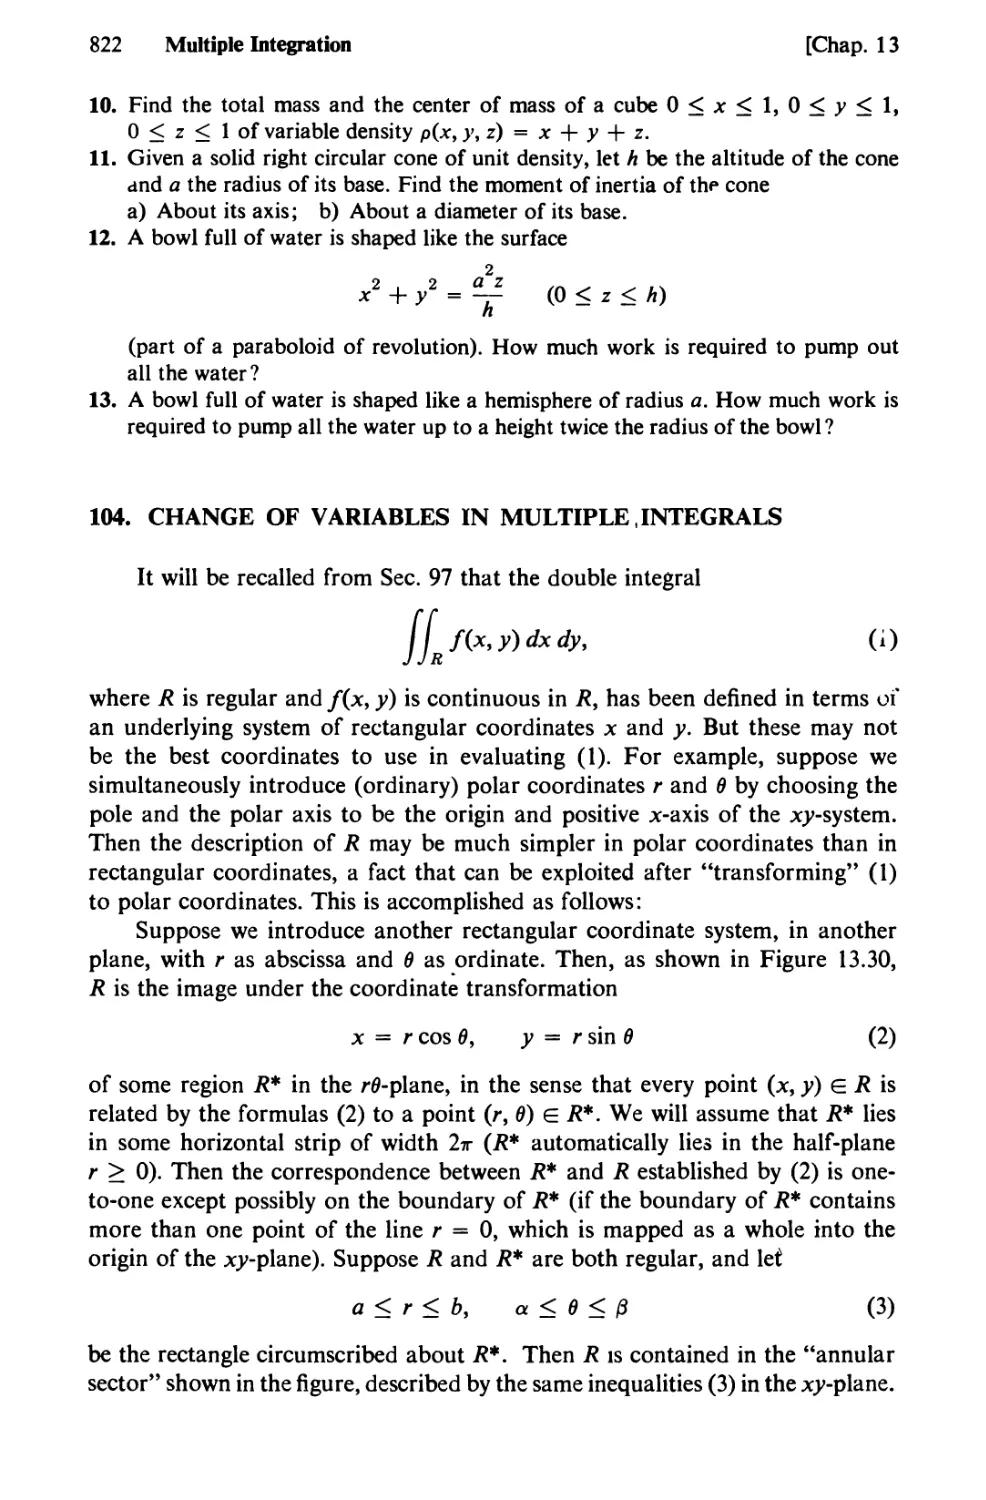 104. Change of Variables in Multiple Integrals